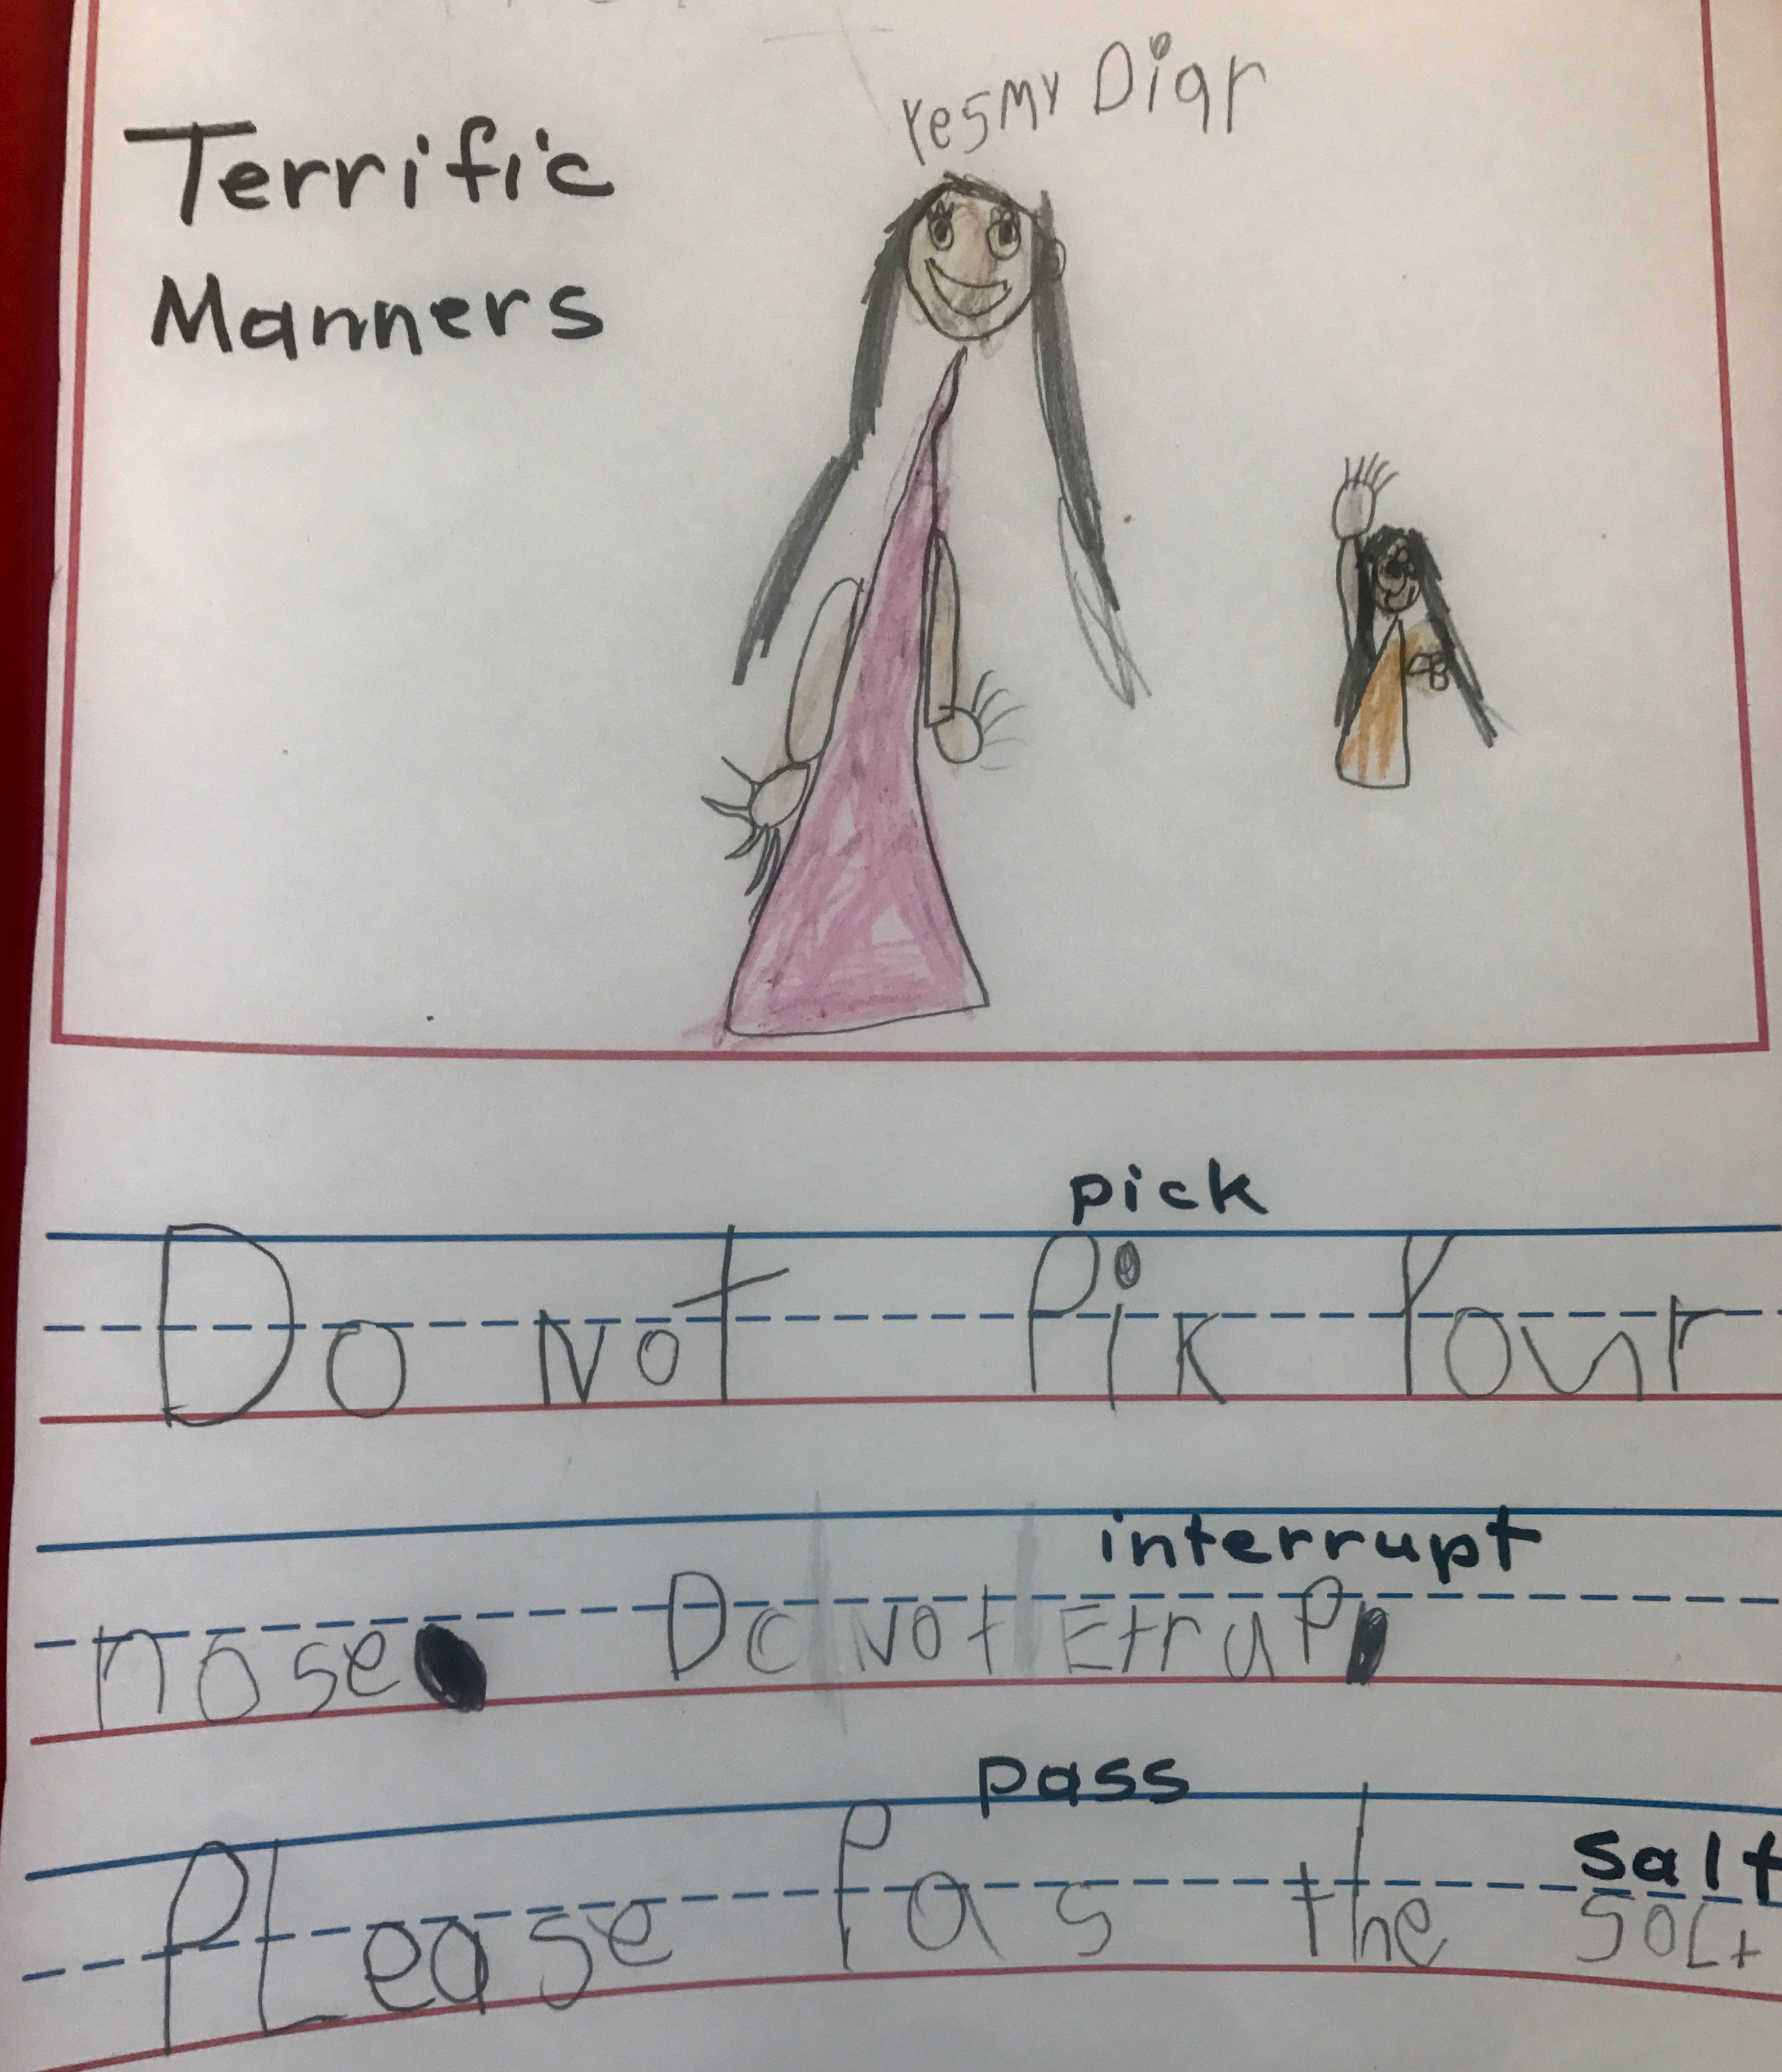 Lesson in manners at La Costa Valley Preschool and Kindergarten write and read